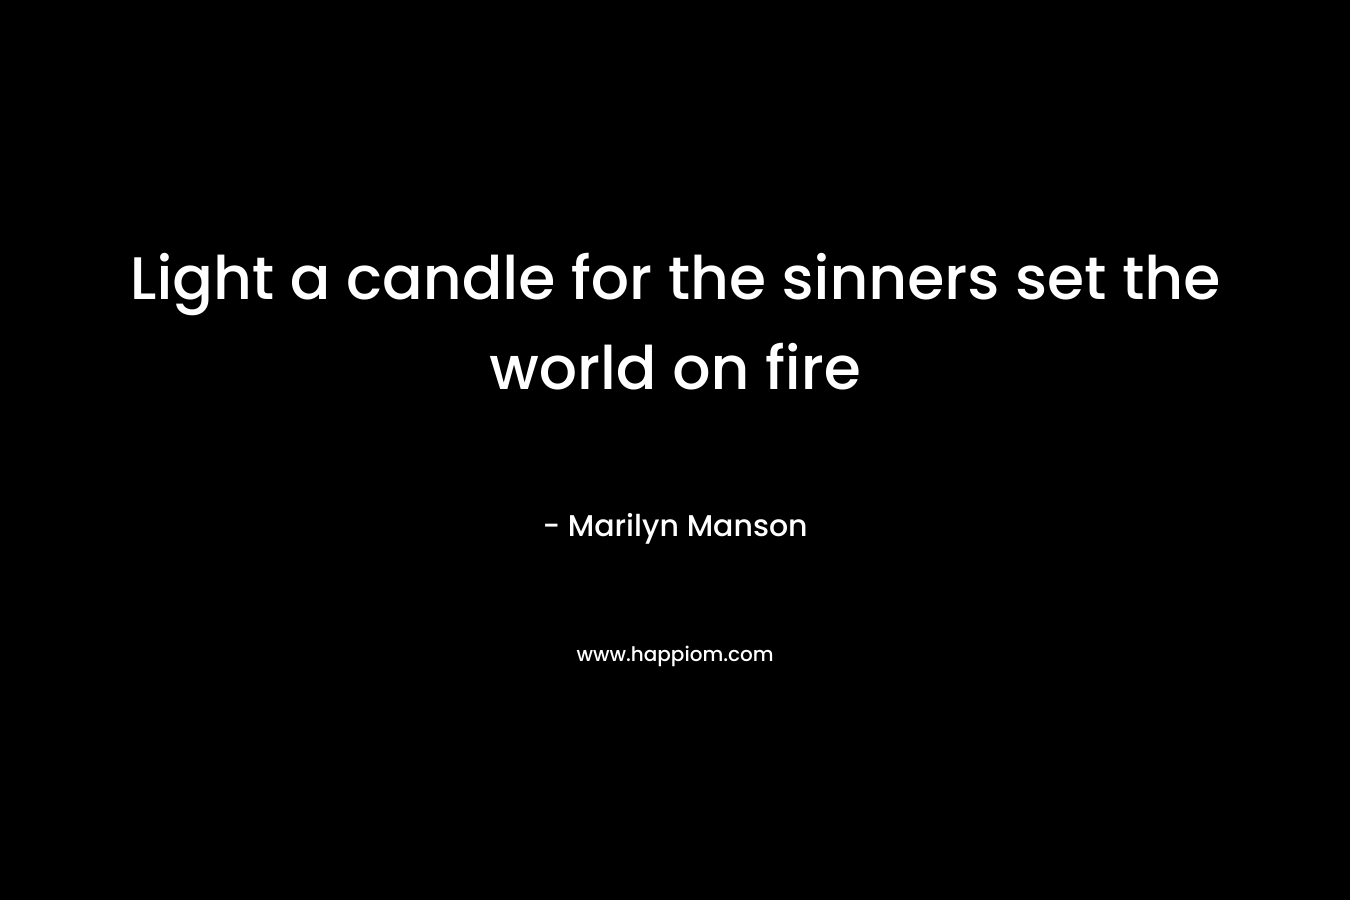 Light a candle for the sinners set the world on fire – Marilyn Manson